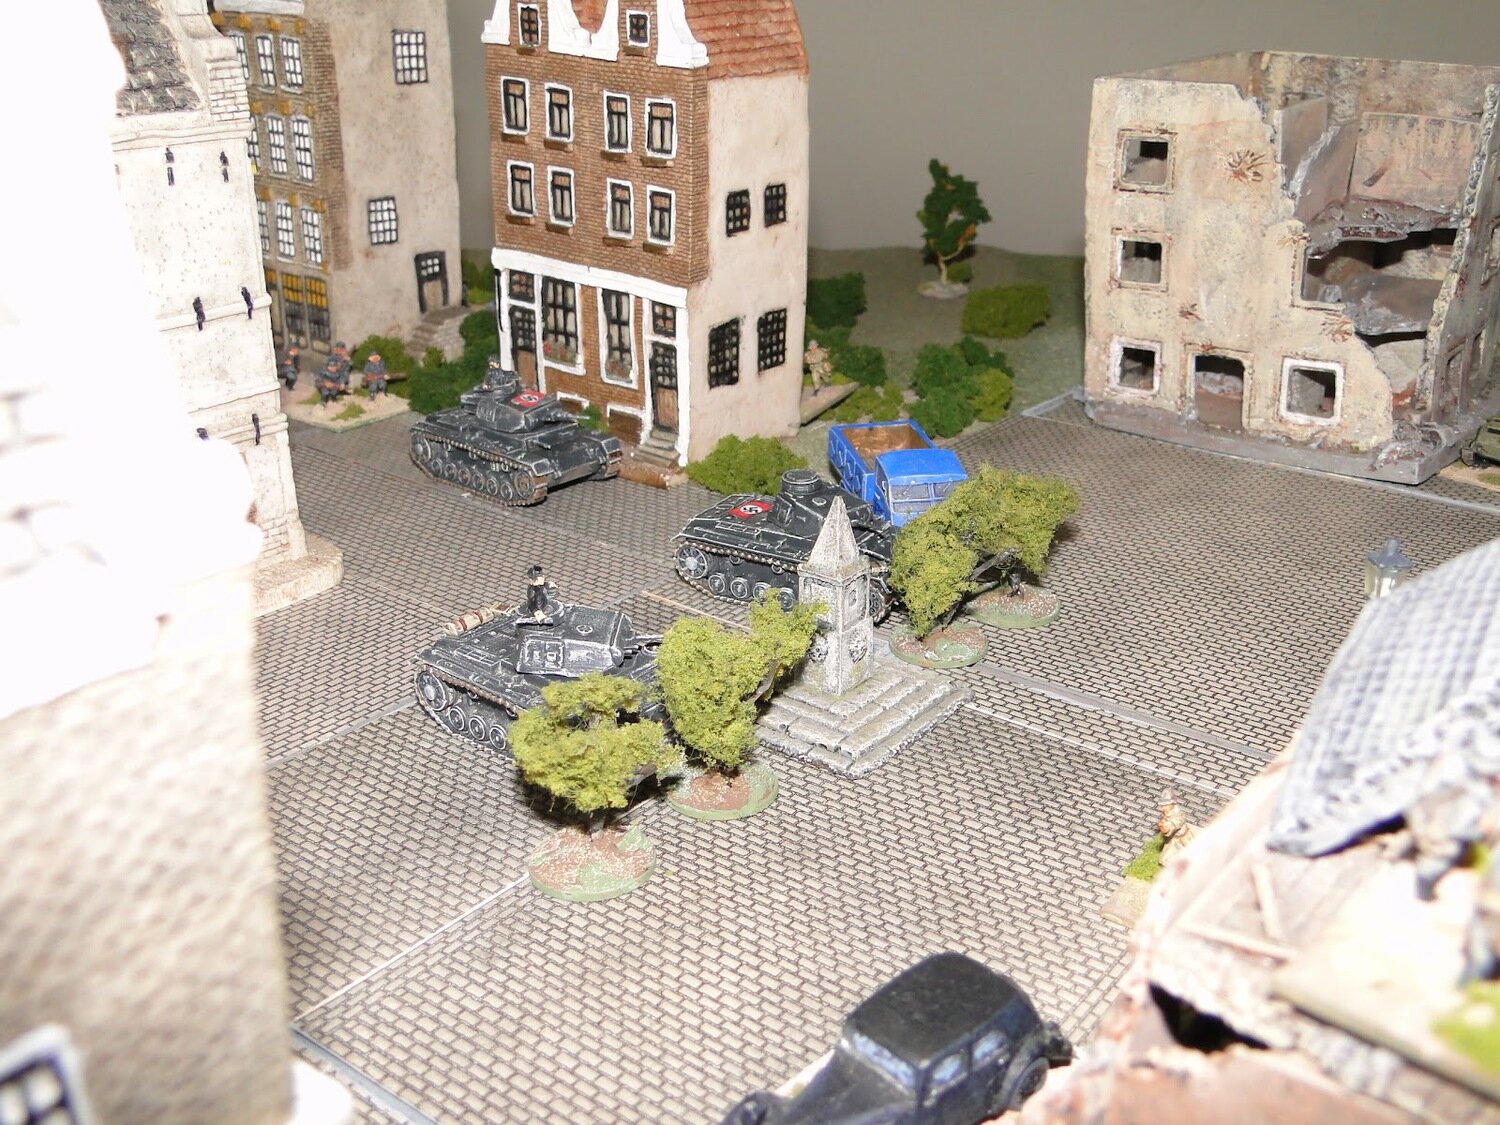 Armoured platoon one pushes into the market place, the infantry in support clear the surrounding buildings